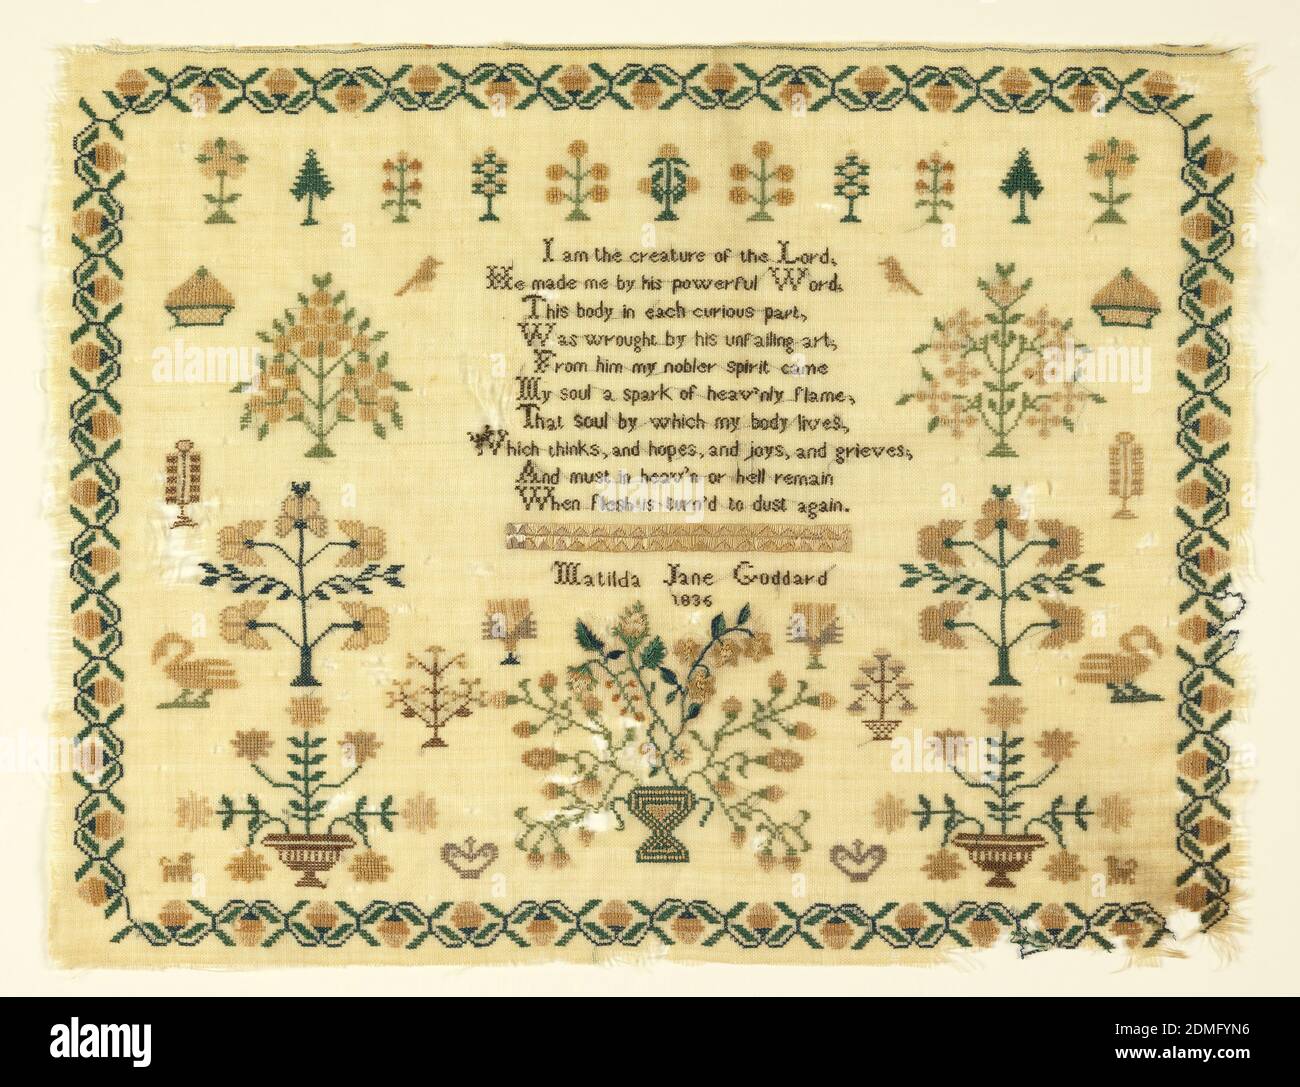 Sampler, Matilda Jane Goddard, American, Medium: silk embroidery on wool foundation Technique: embroidered in counted cross and satin stitches on plain weave foundation, A verse and inscription in the center are surrounded by a symmetrical arrangement of trees, flowering trees, fruit baskets, and birdbaths. With a strawberry vine border., The verse reads:, I am the creature of the Lord, He made me by his powerful word, This body in each curious part, was wrought by his unfailing art, From him my nobler spirit came, My soul a spark of heavenly flame, That soul by which my body lives Stock Photo